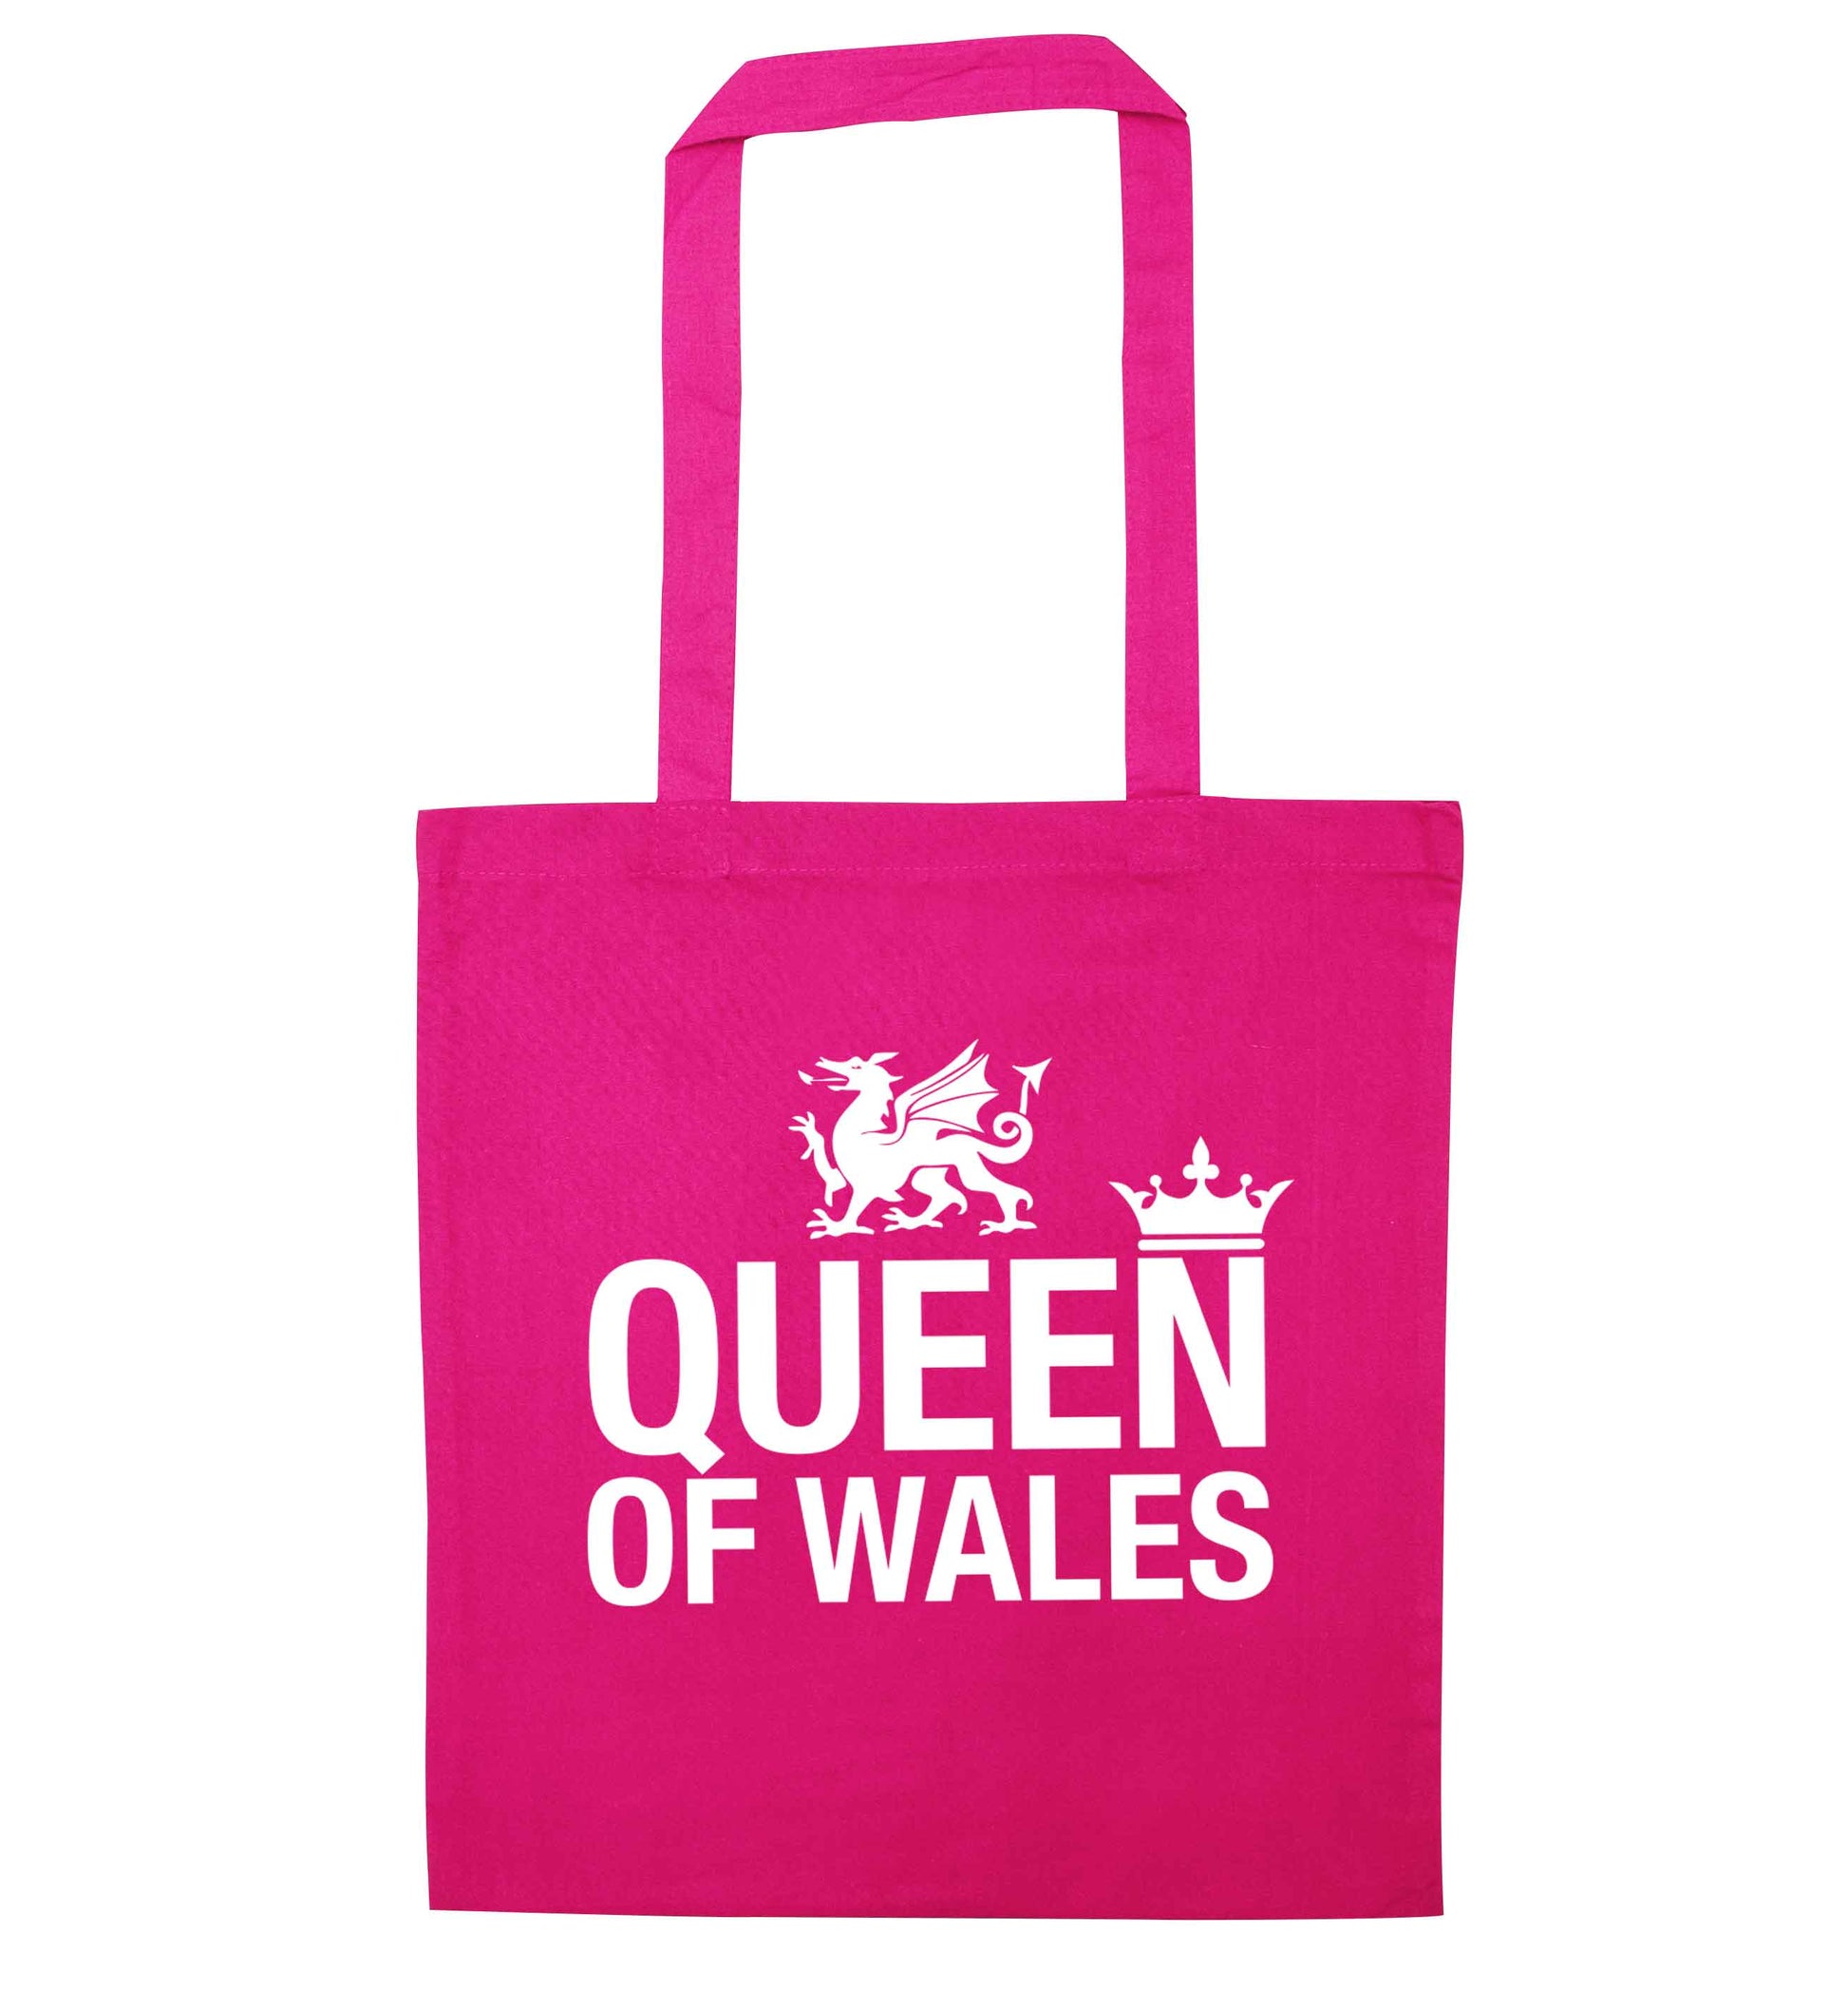 Queen of Wales pink tote bag